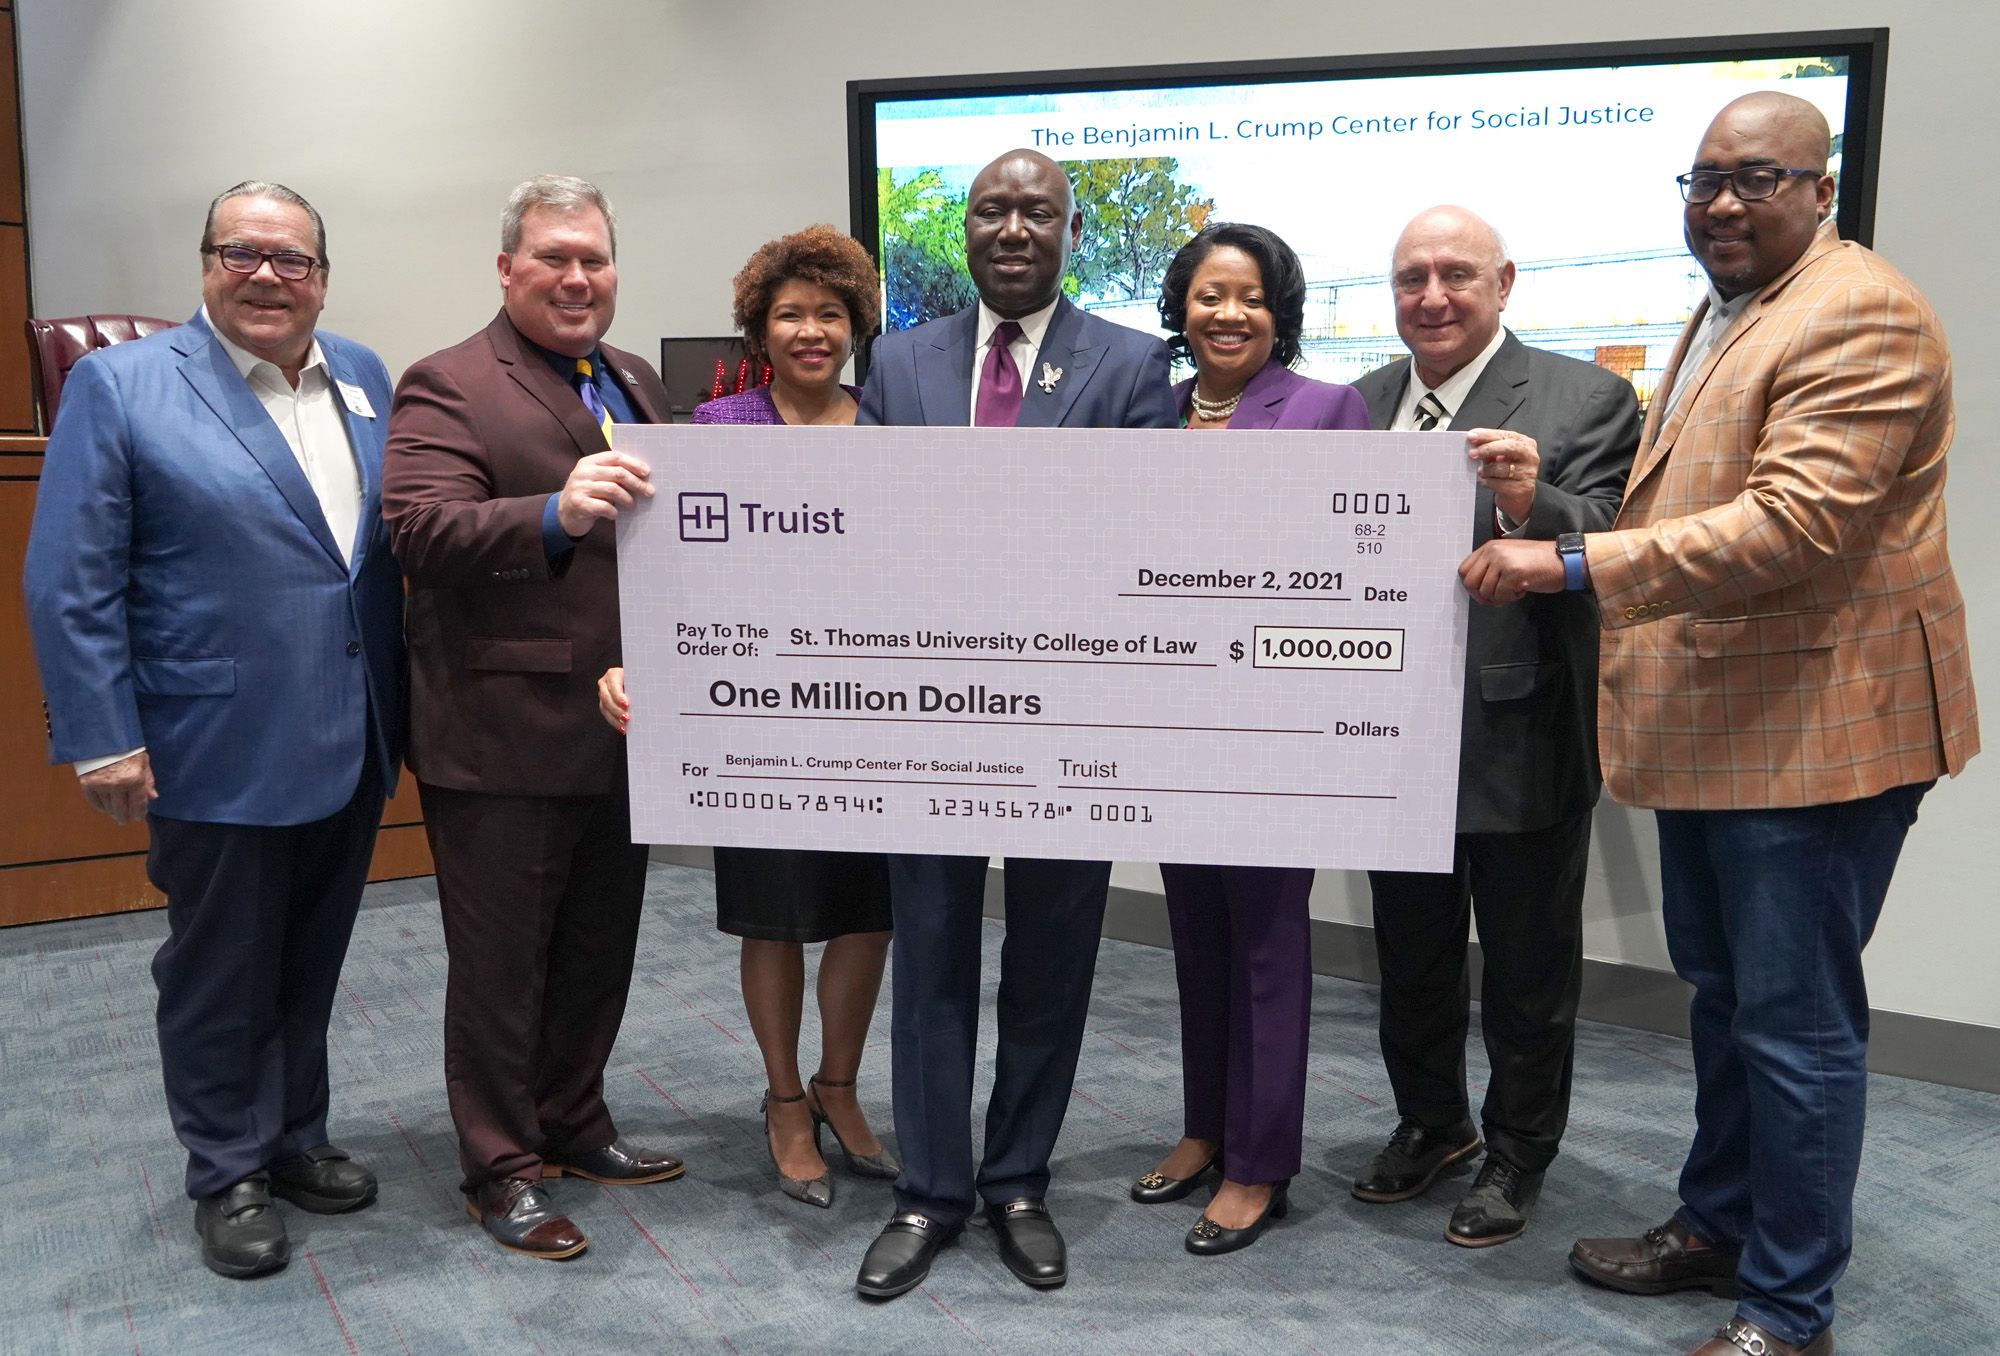 From left to right: STU Board of Trustees Chair John Dooner, STU President David A. Armstrong, J.D., STU College of Law Dean Tamara Lawson, Benjamin L. Crump, EVP at Truist Financial Wendy McSweeney, Herman Russomano, J.D., and Truist South Florida Regional President Tony Coley